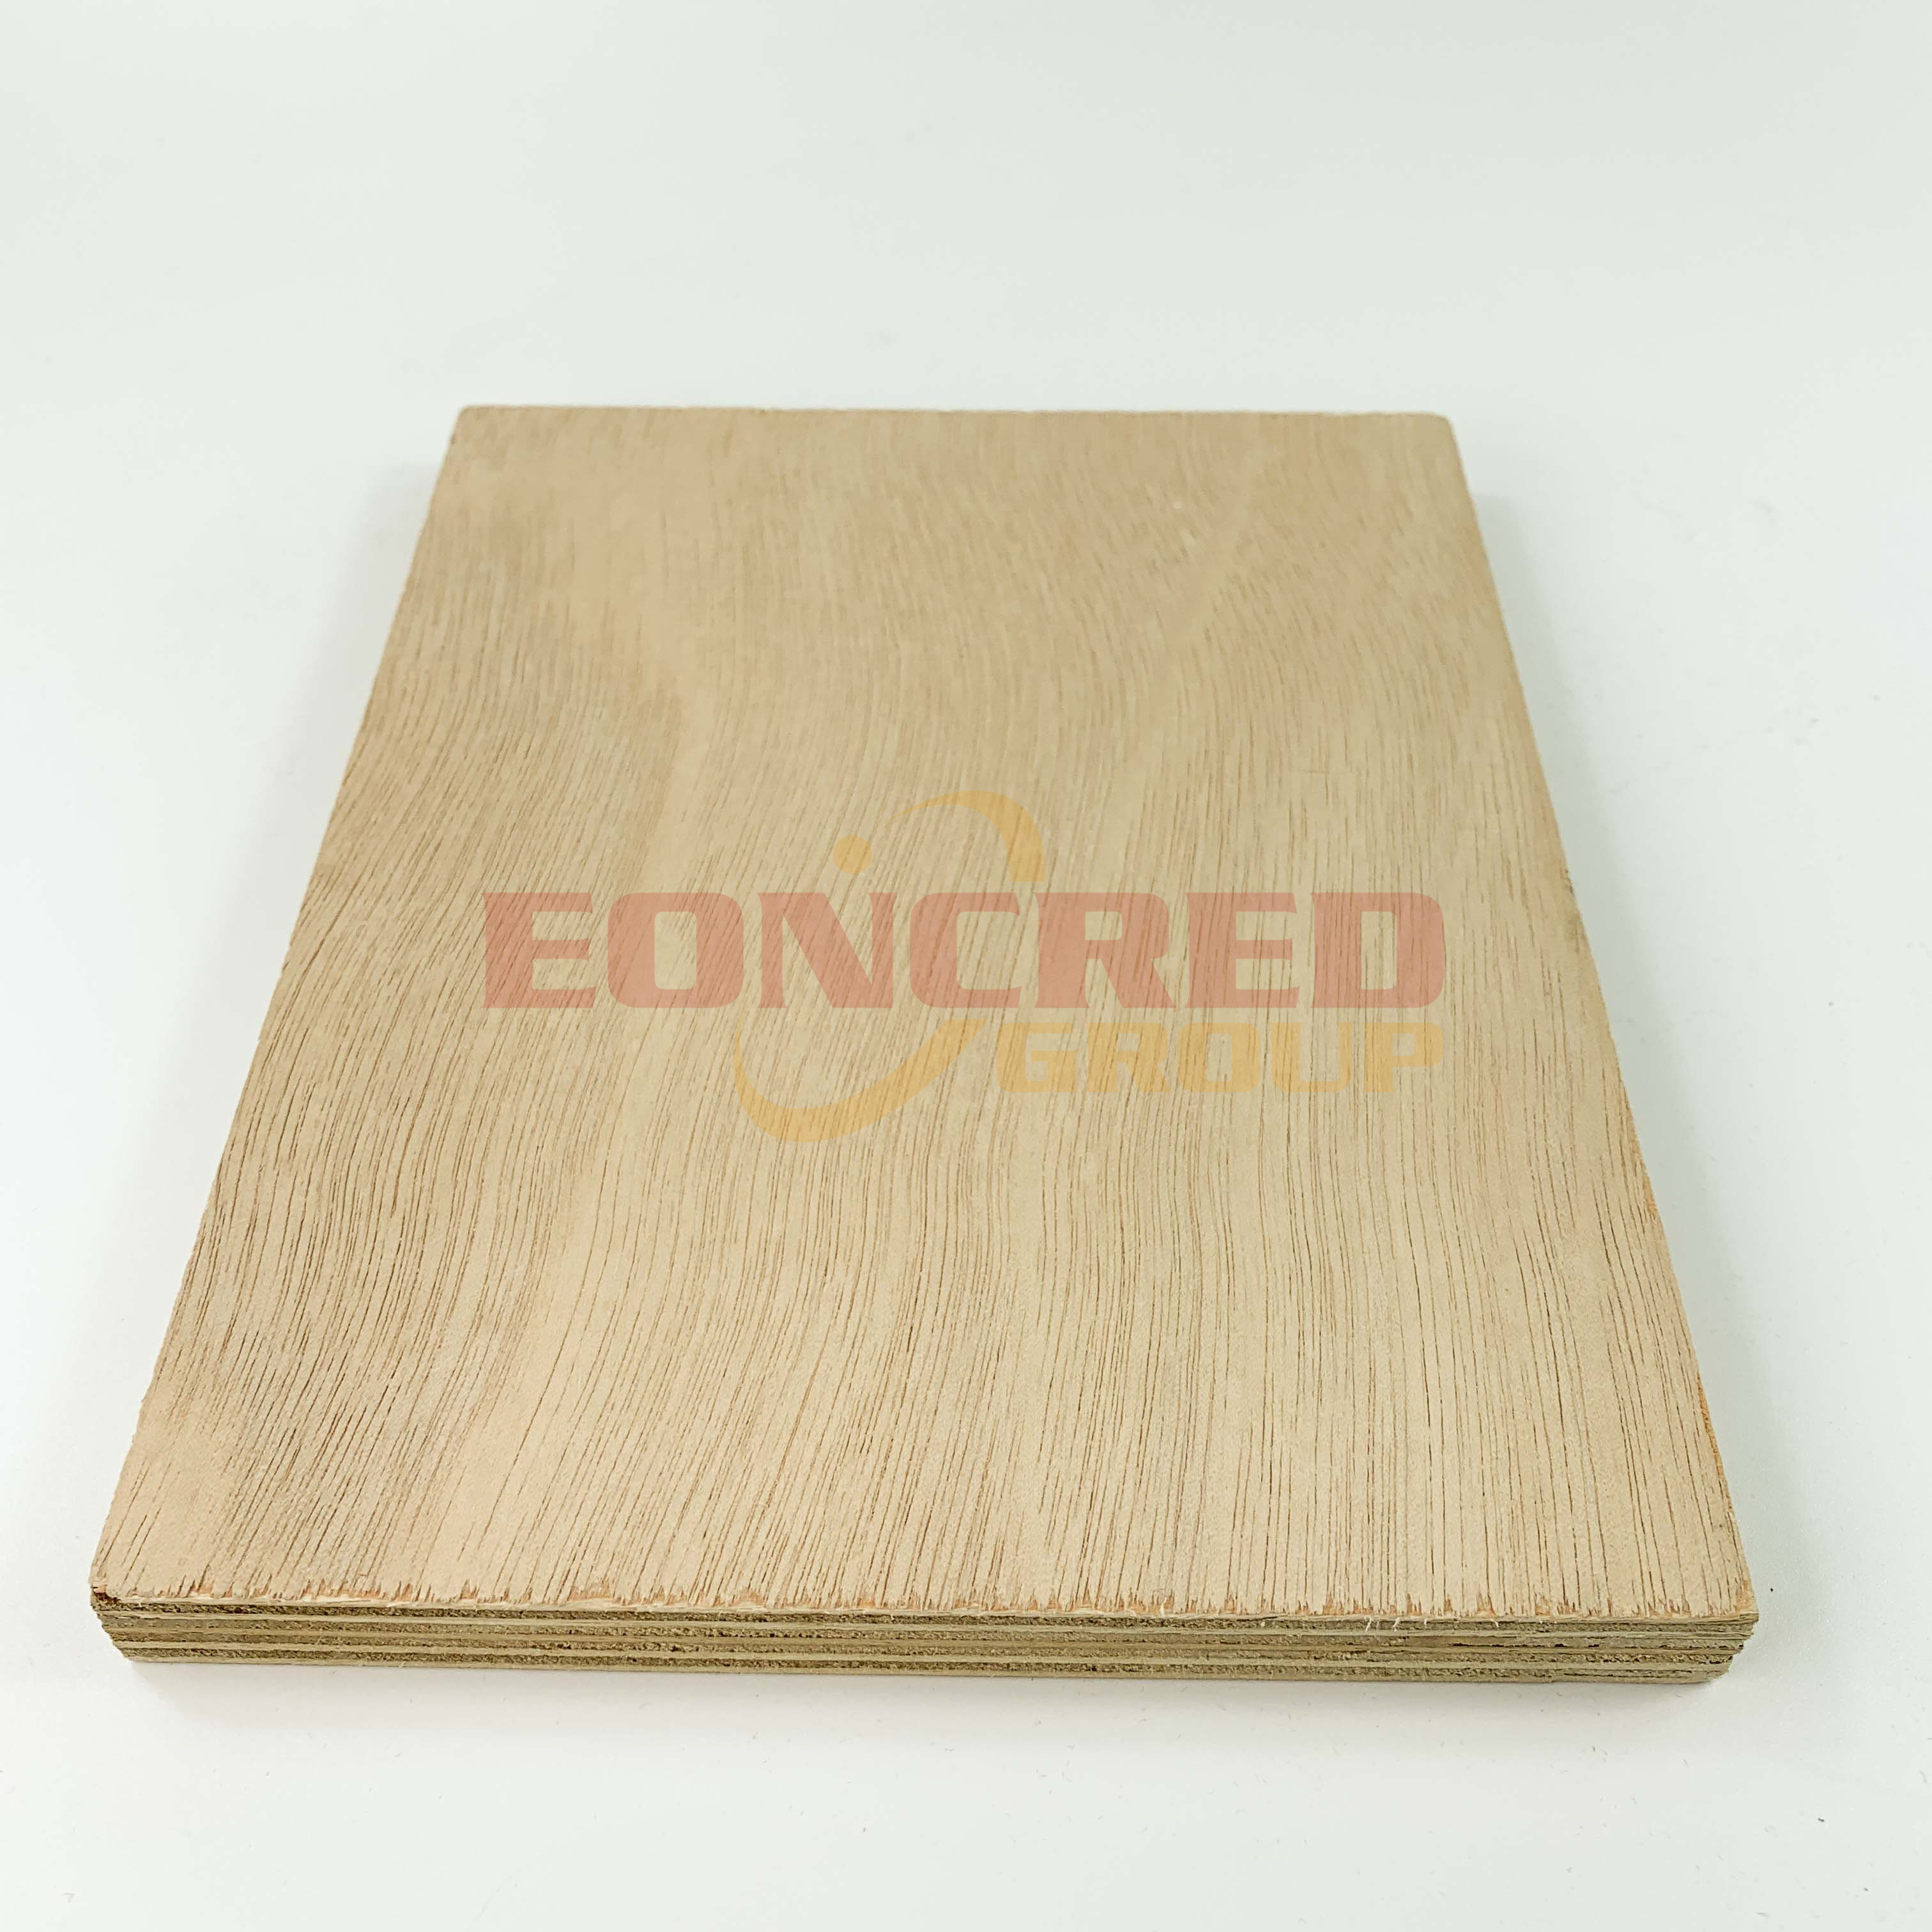 4x8 18mm Okoume Plywood Manufacturer from china